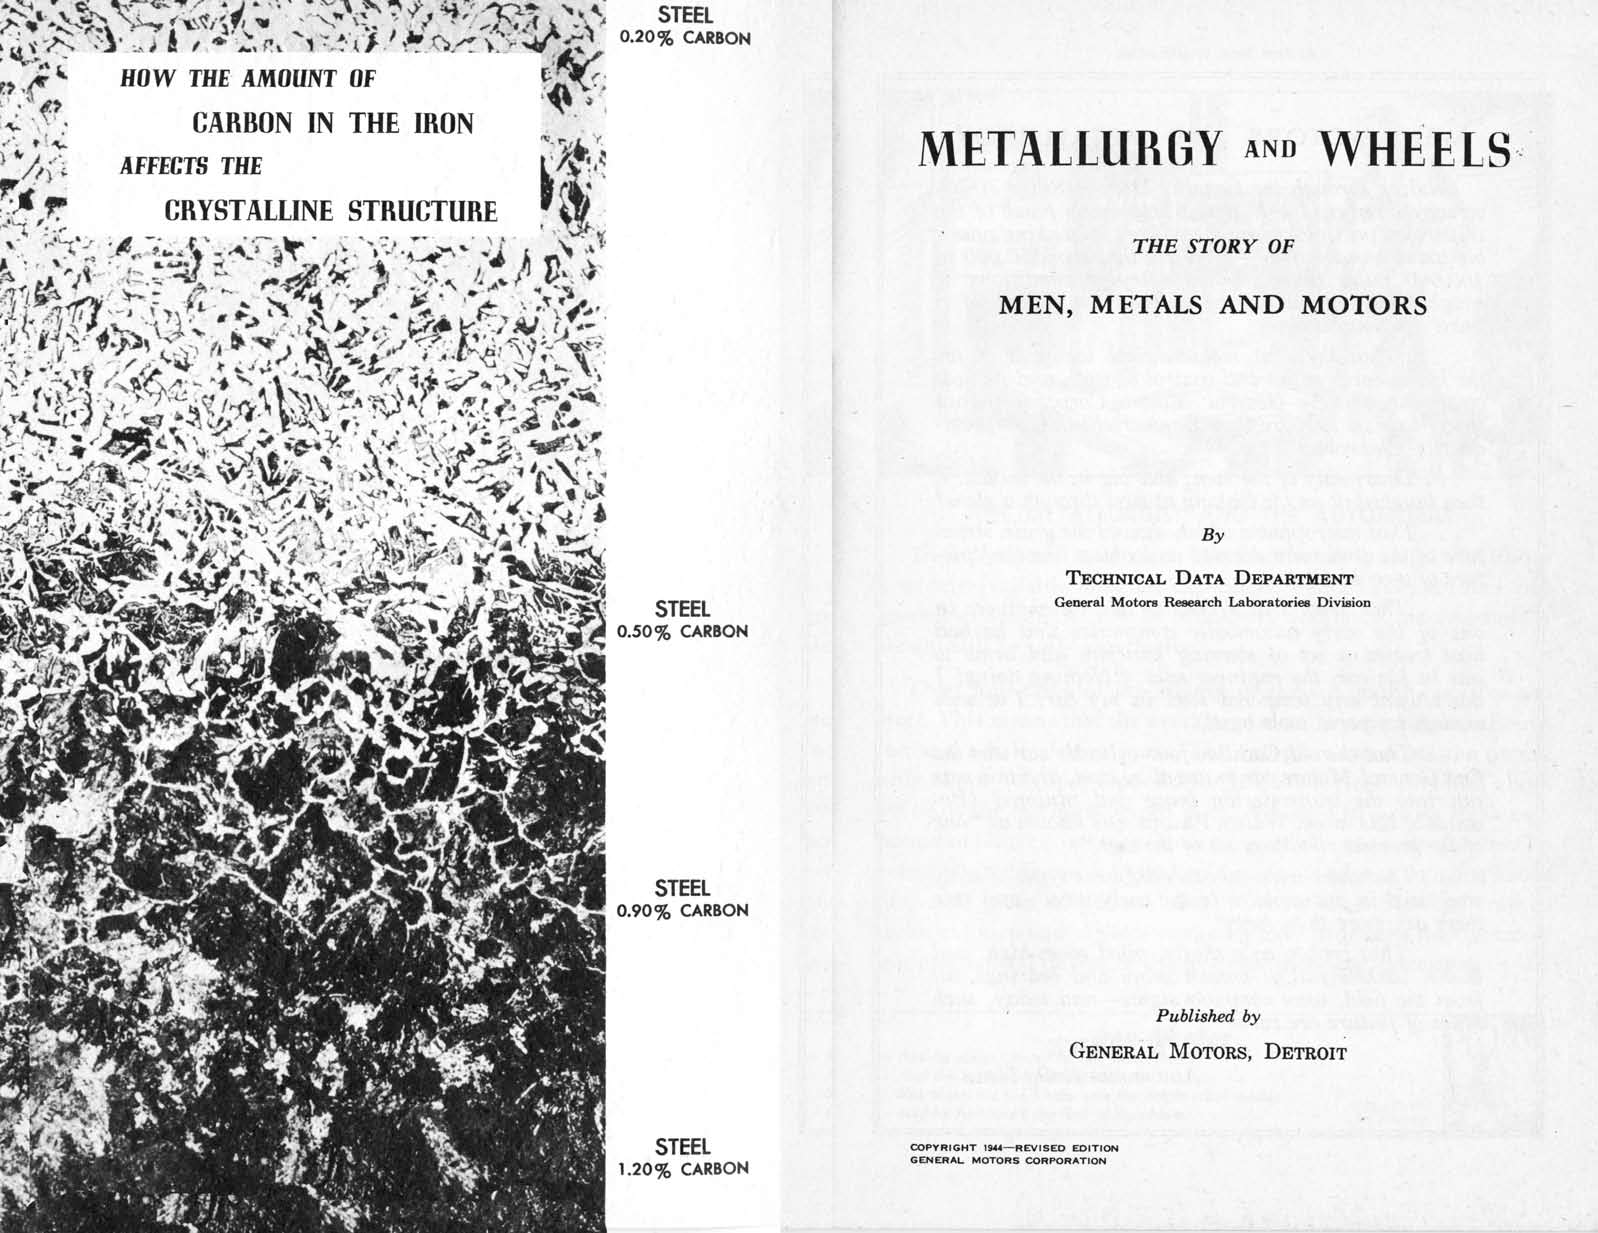 1944-Metallurgy_and_Wheels-00a-01